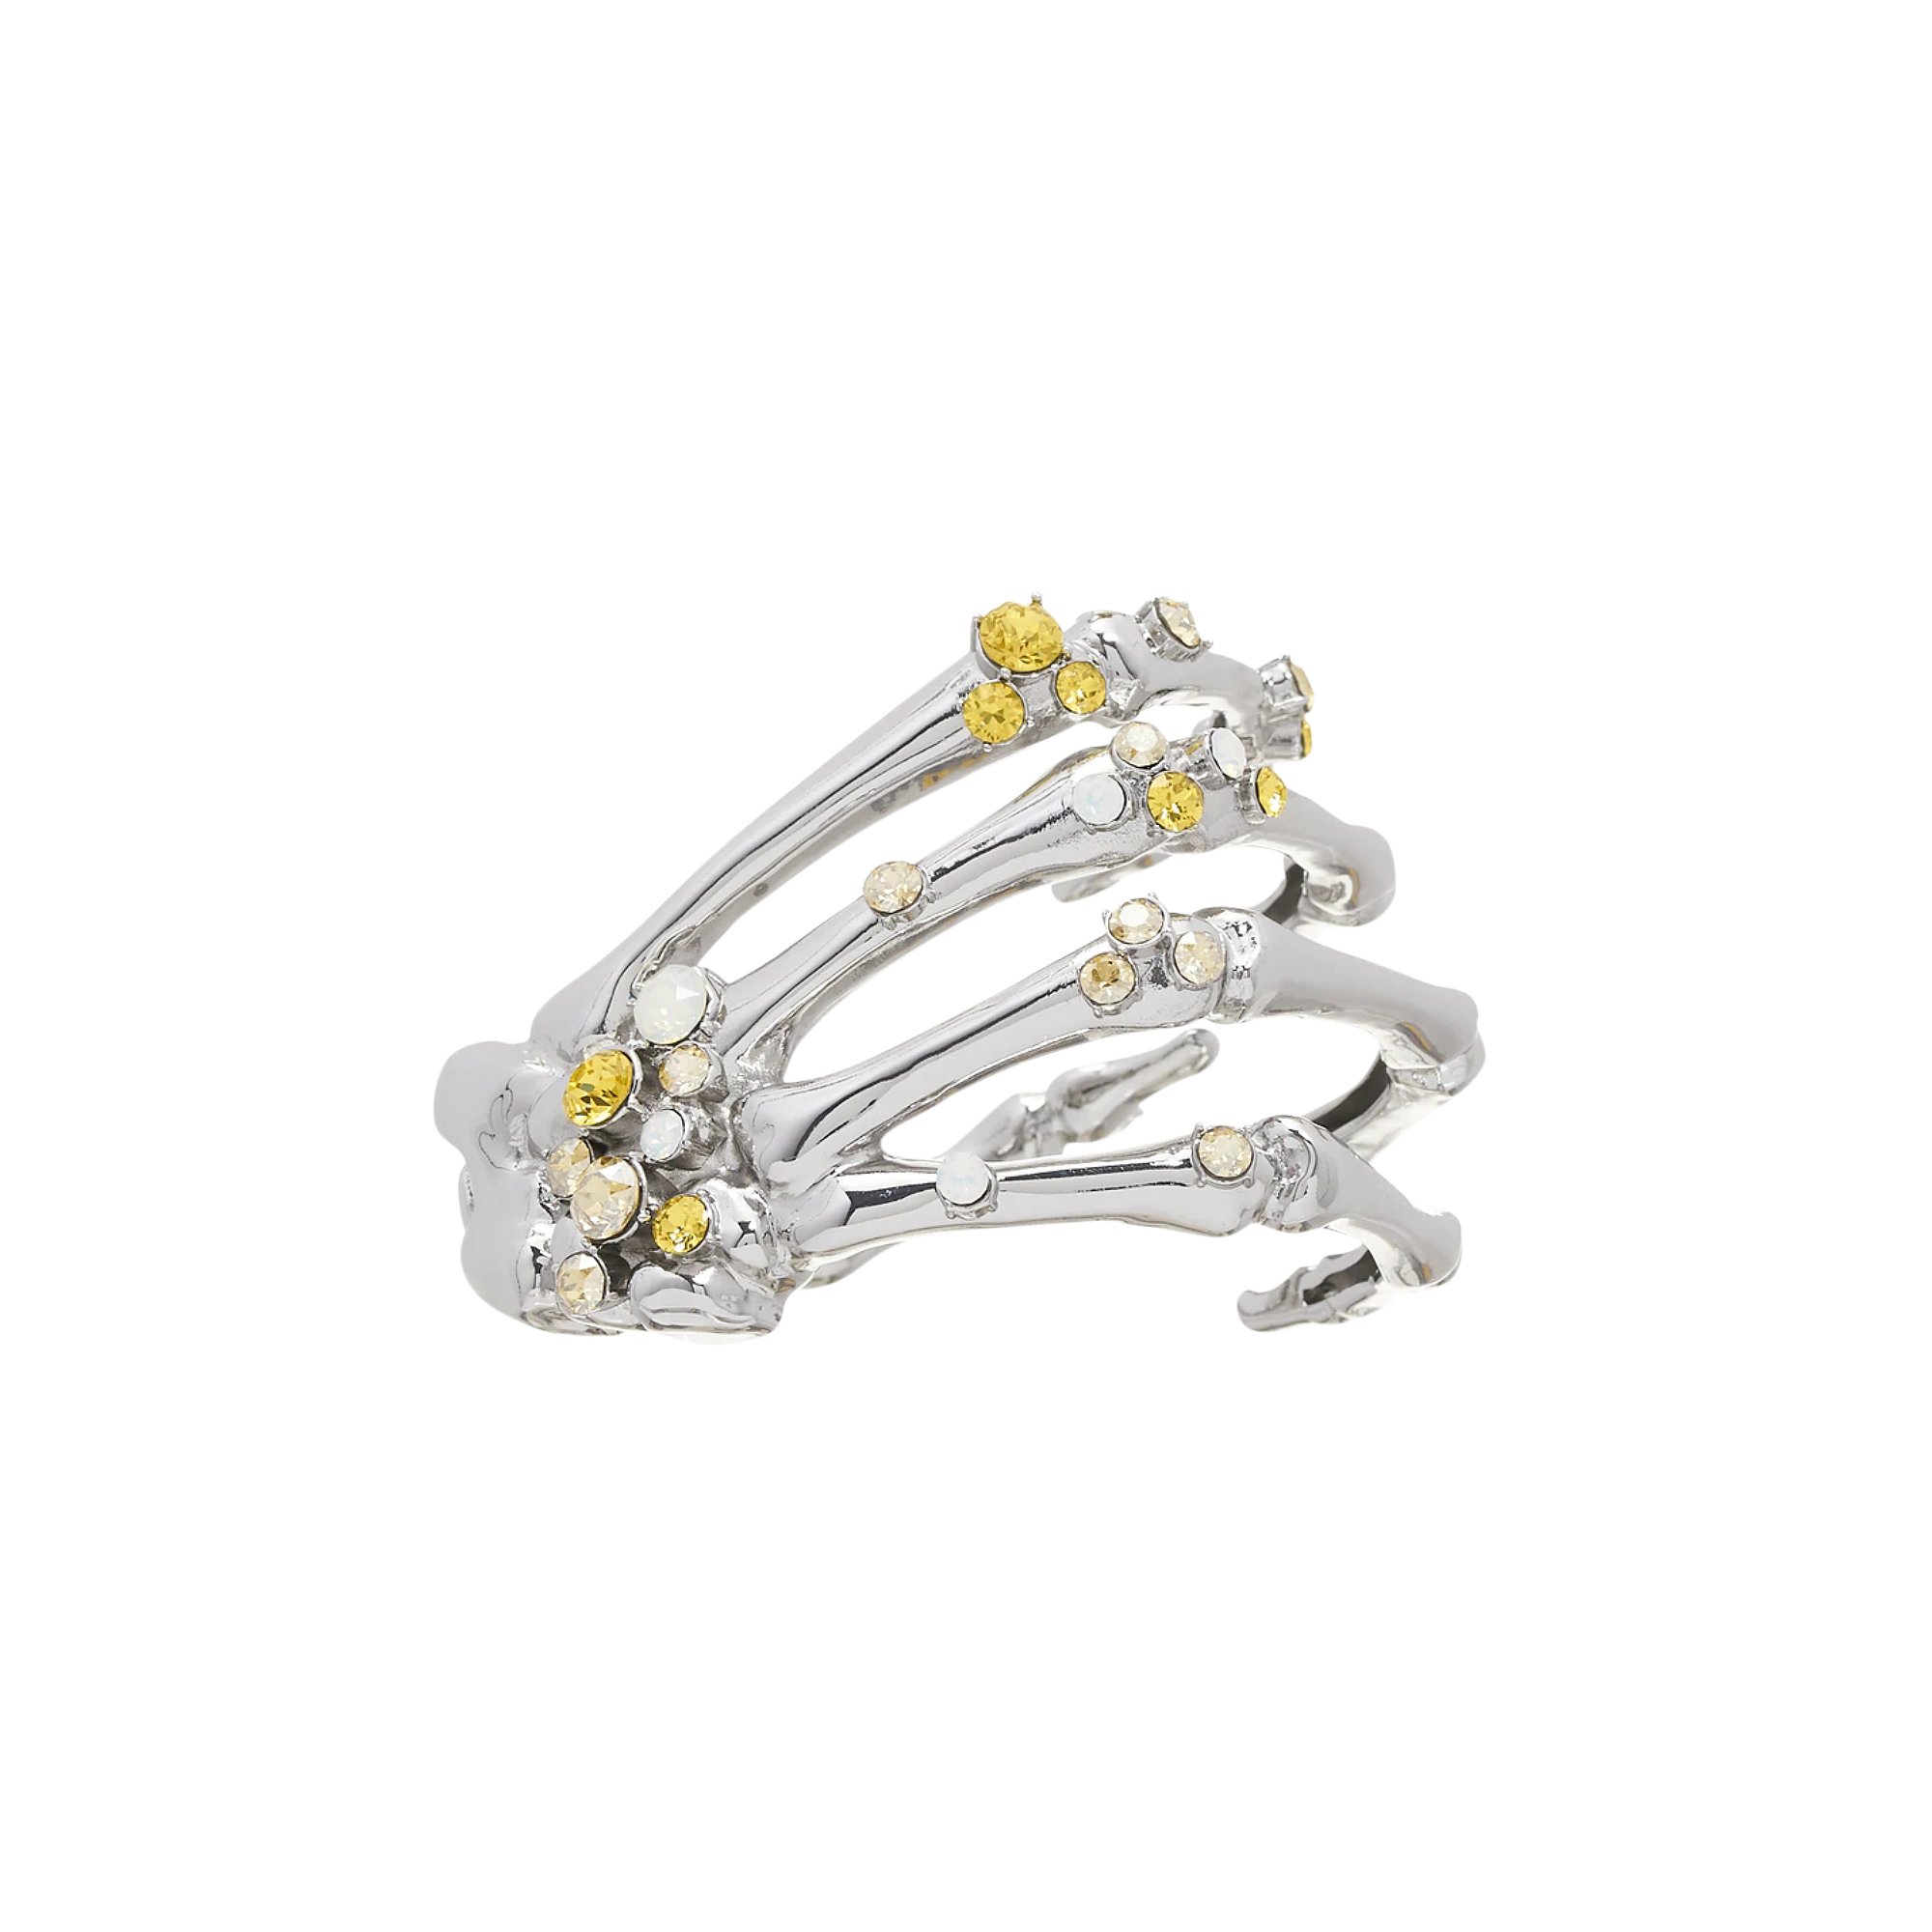 Buy Raf Simons Skeleton Bracelet With Cluttered Strass 'Yellow 